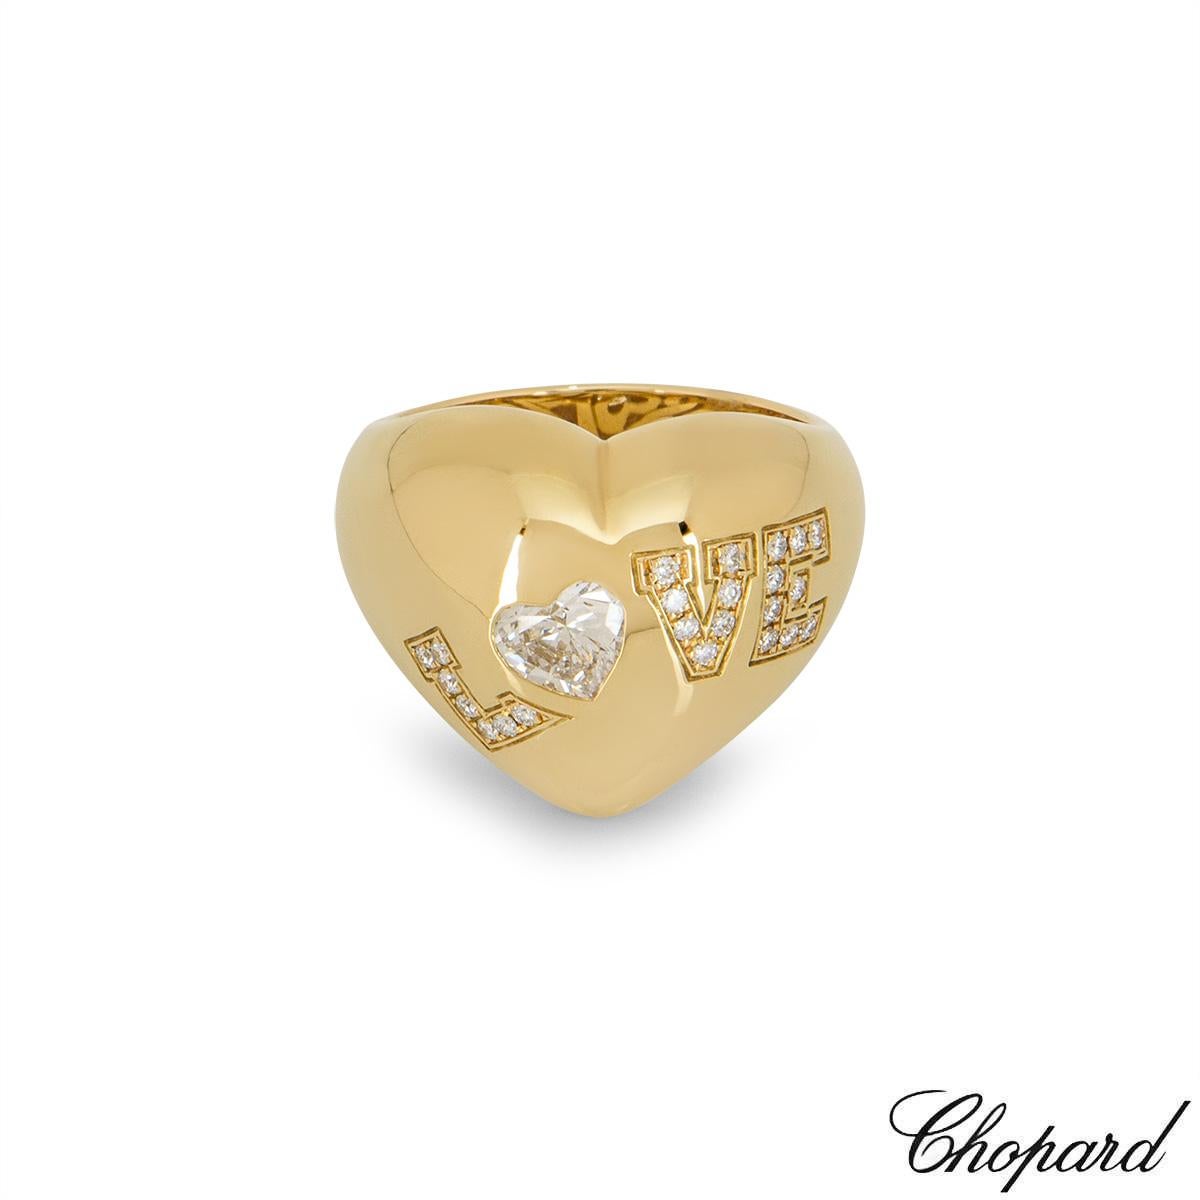 chopard love ring with diamond